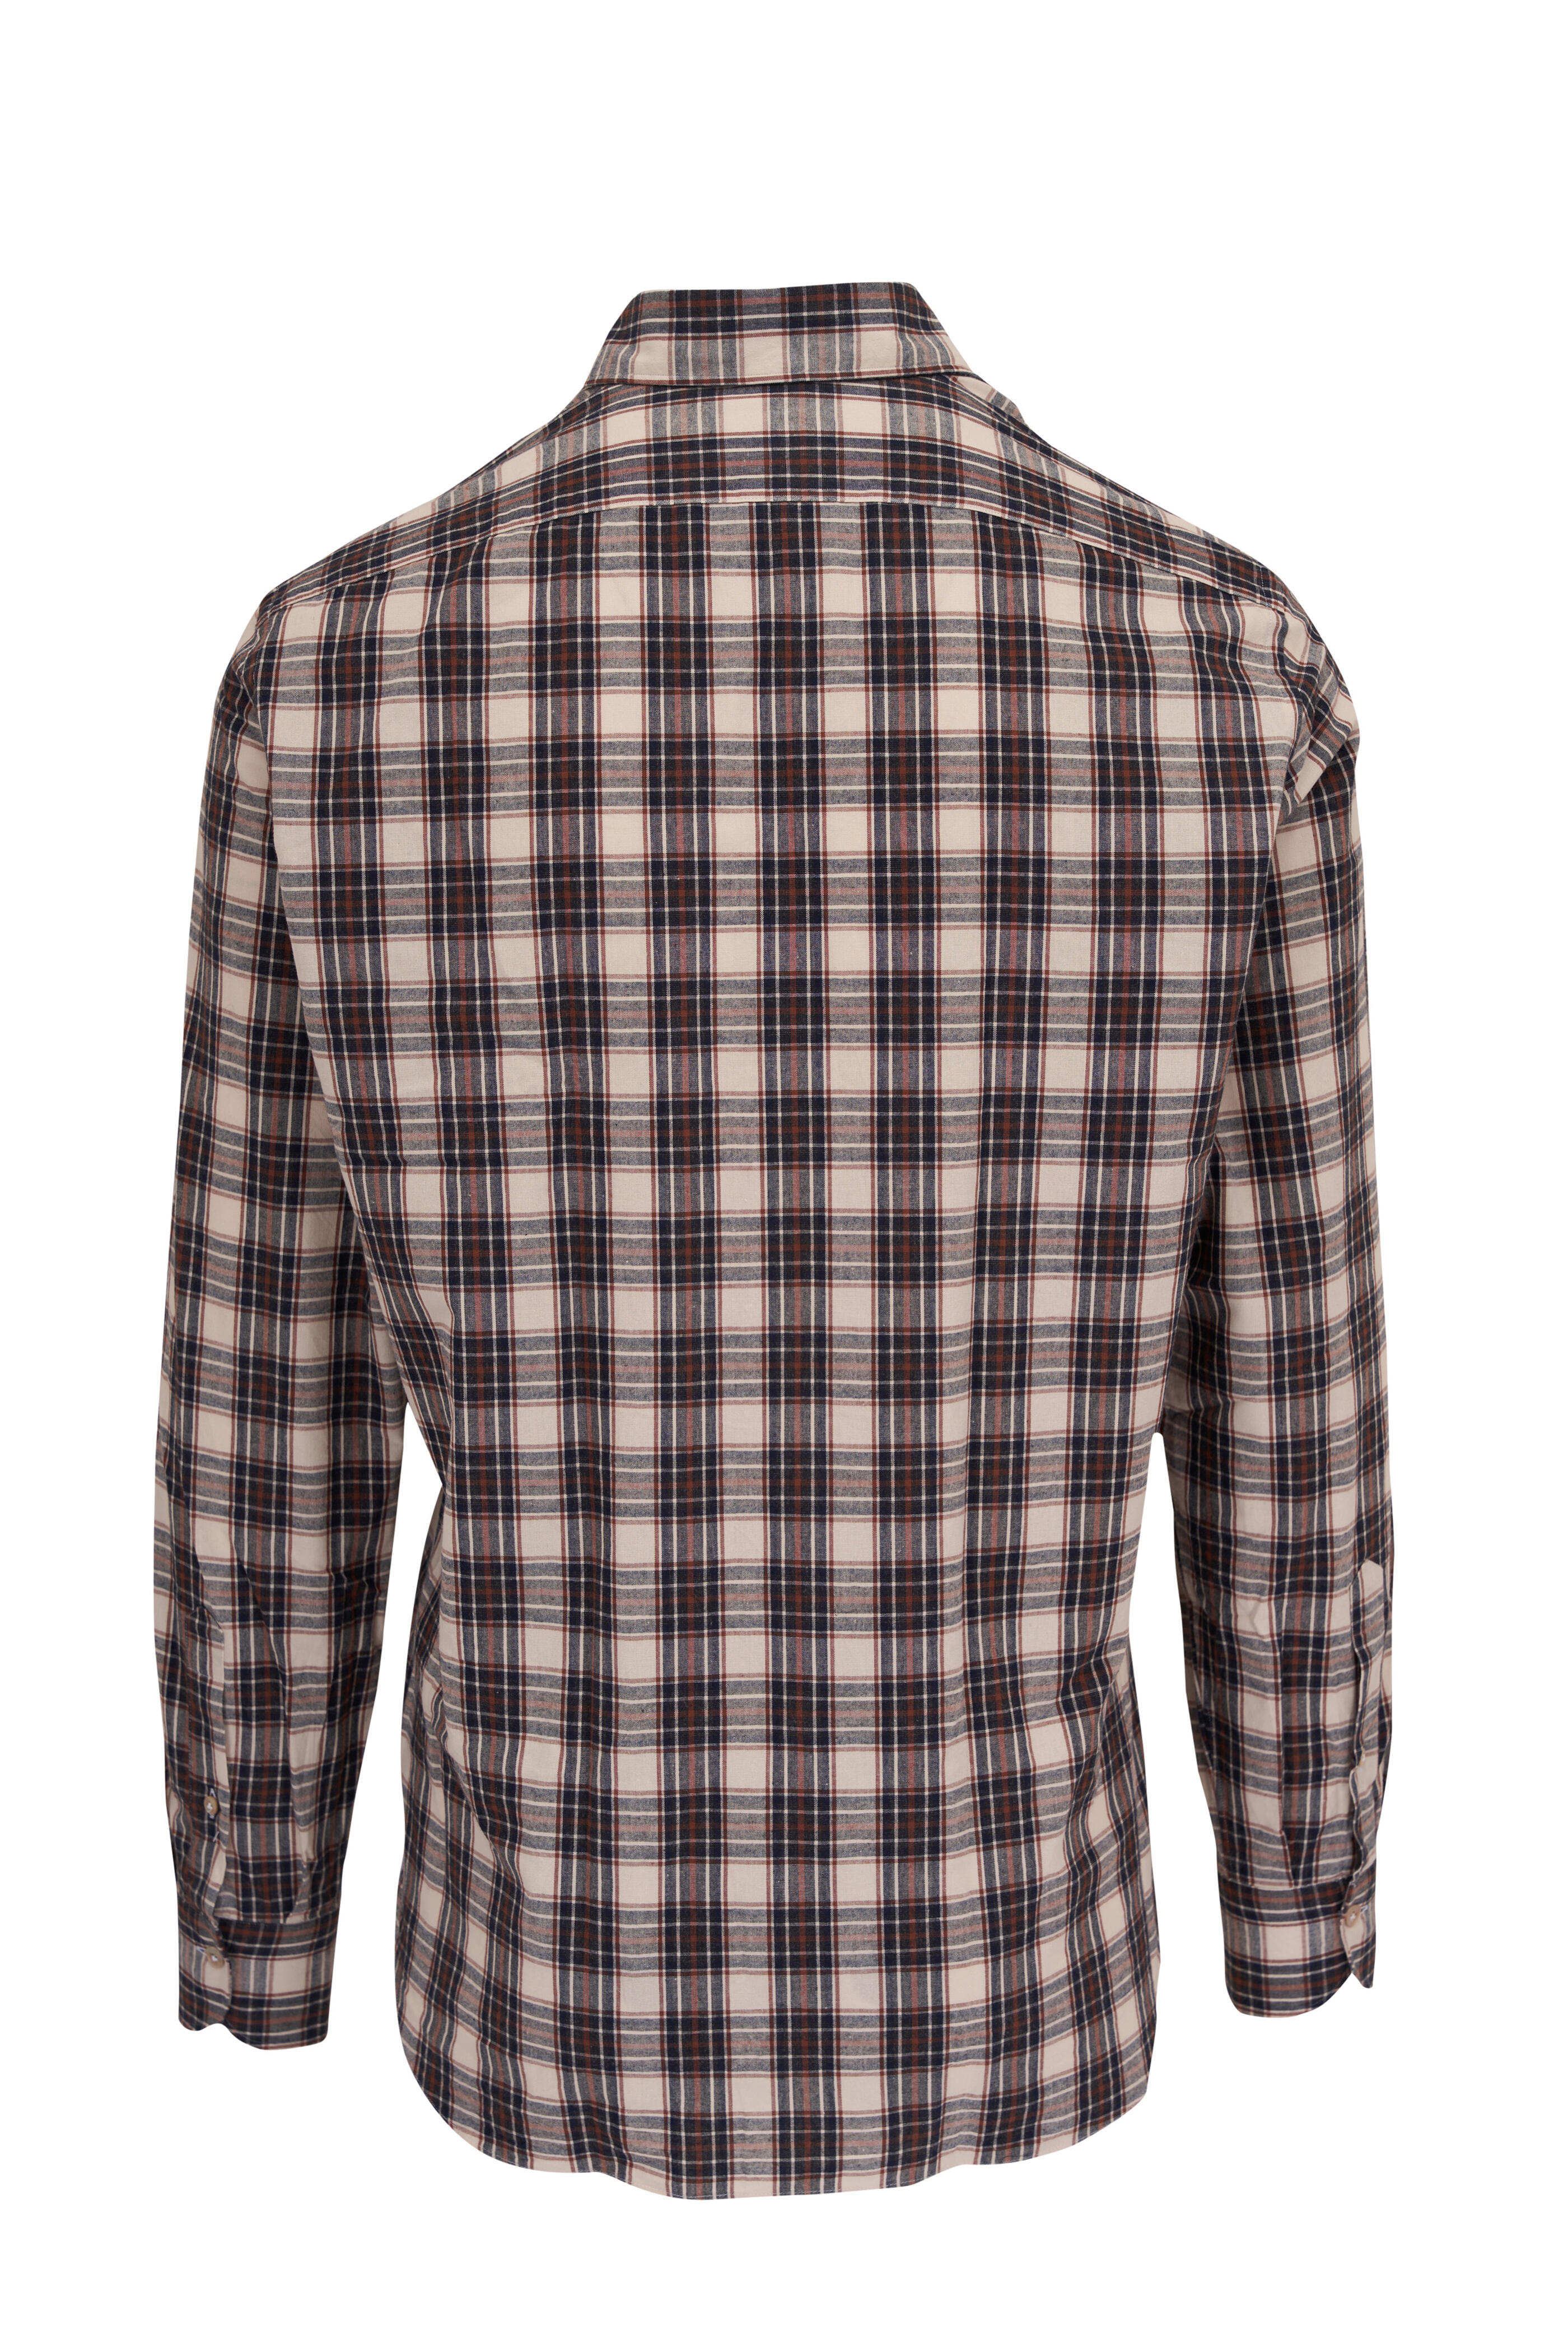 Giannetto - Ivory & Brown Check Cotton Sport Shirt